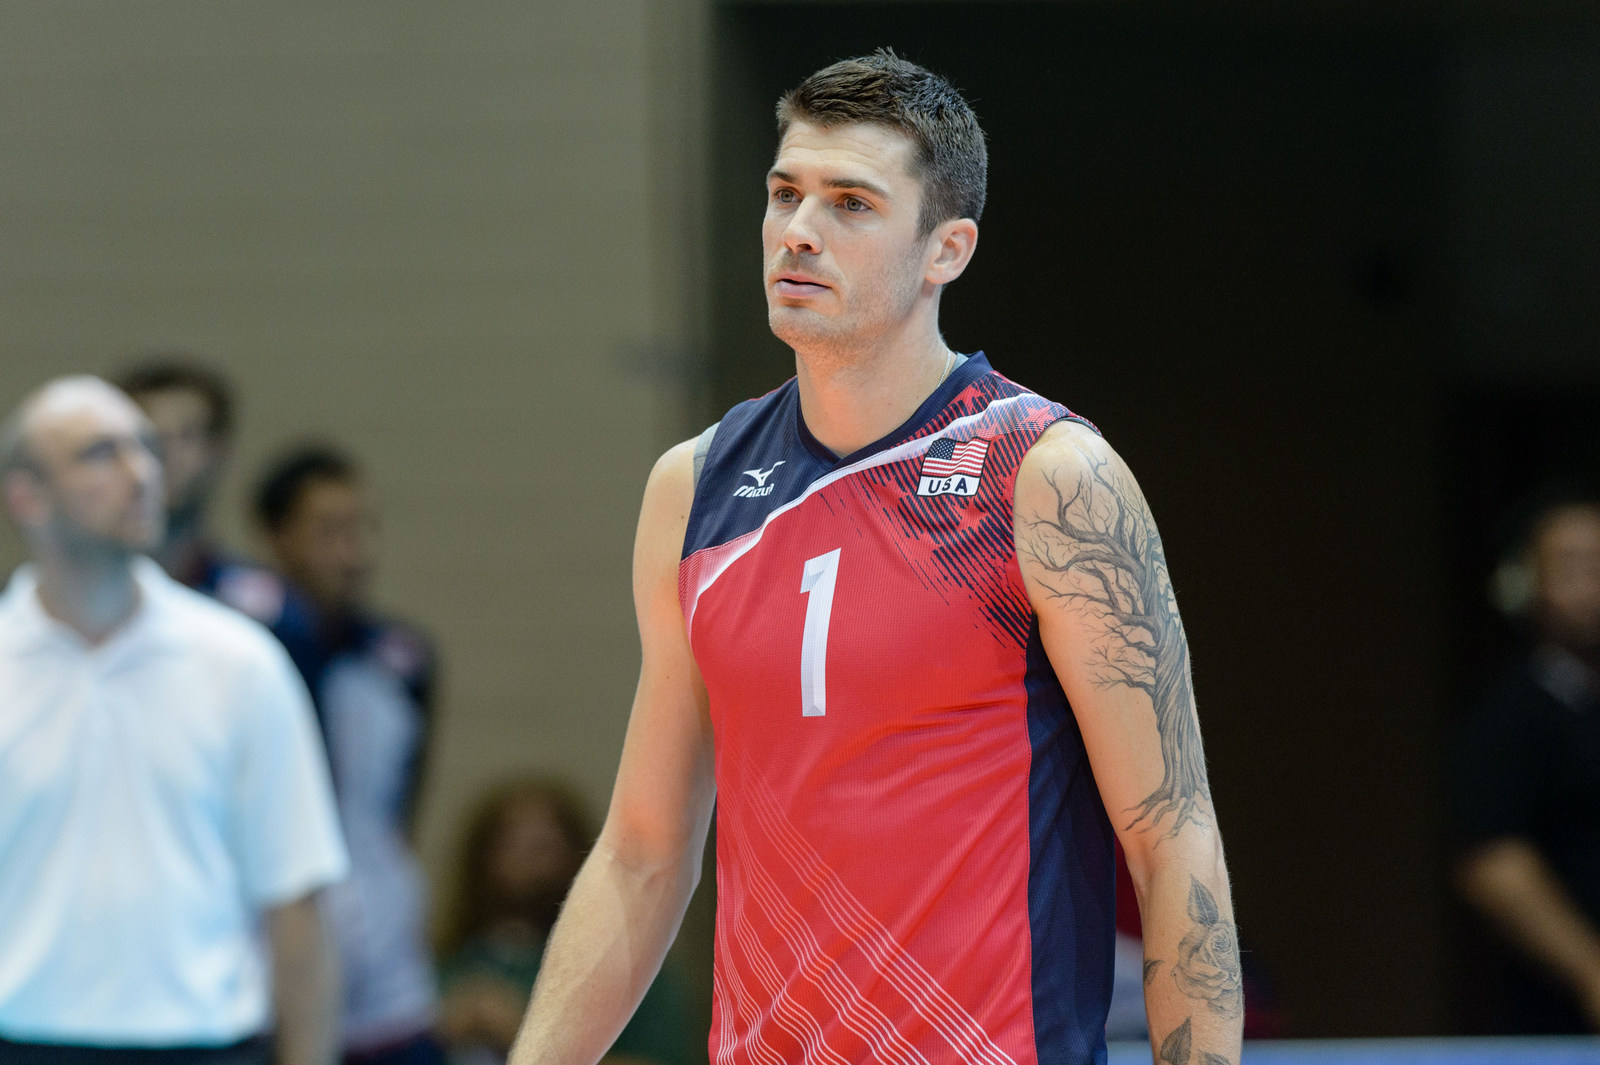 USA's Matthew Anderson (1) during a FIVB Men's Volleyball World League match between the USA and Bulgaria in Dallas, Texas.